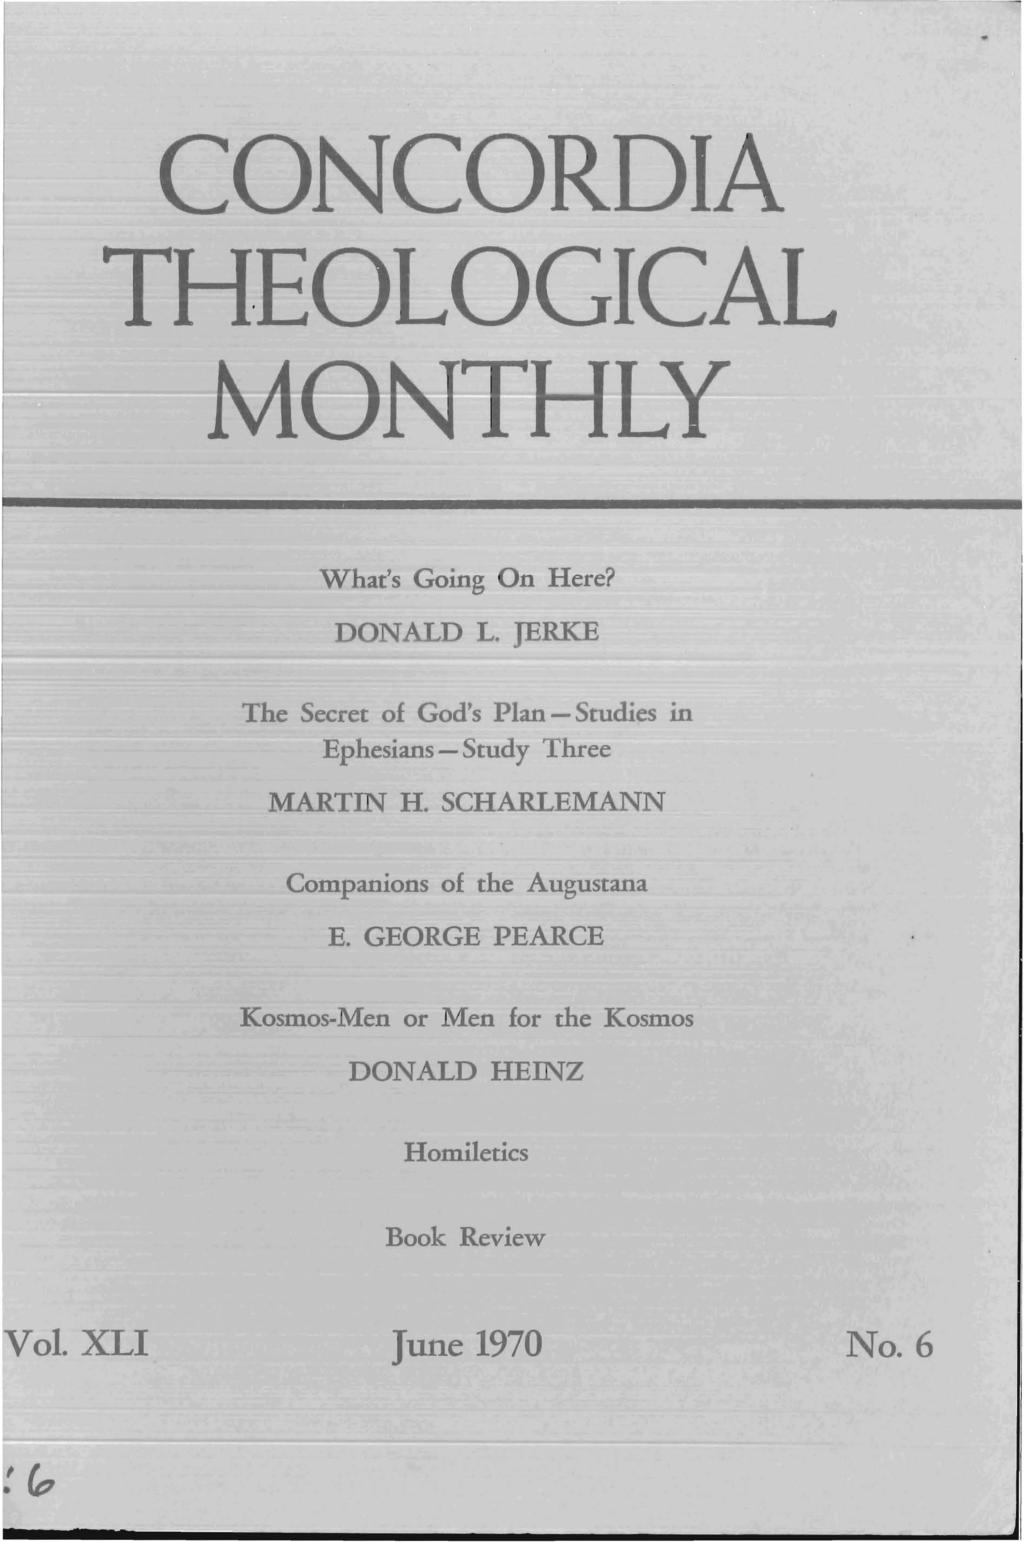 CONCORDIA THEOLOGICAL MONrHLY What's Going On Here? DONALD L. JERKE The Secret of God's Plan - Studies in Ephesians - Study Three MARTIN H.